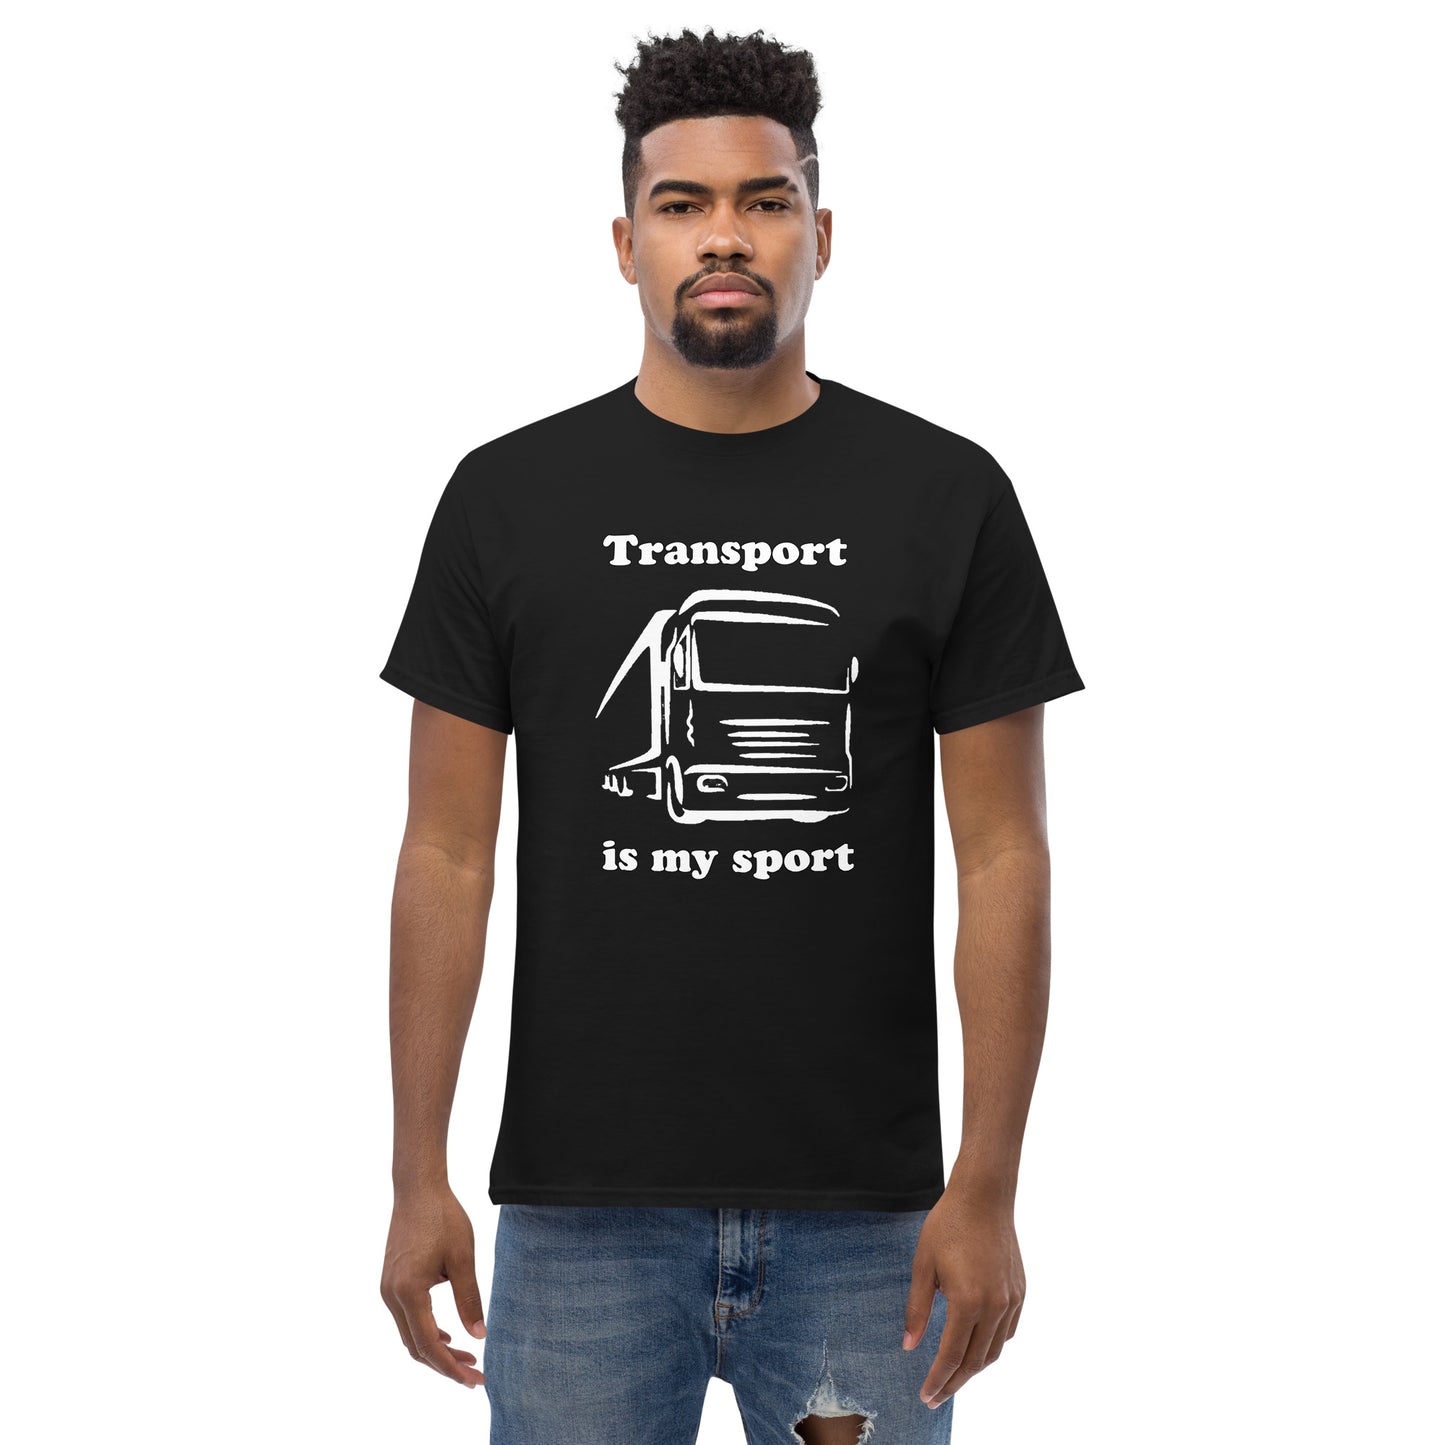 Man with black t-shirt with picture of truck and text "Transport is my sport"